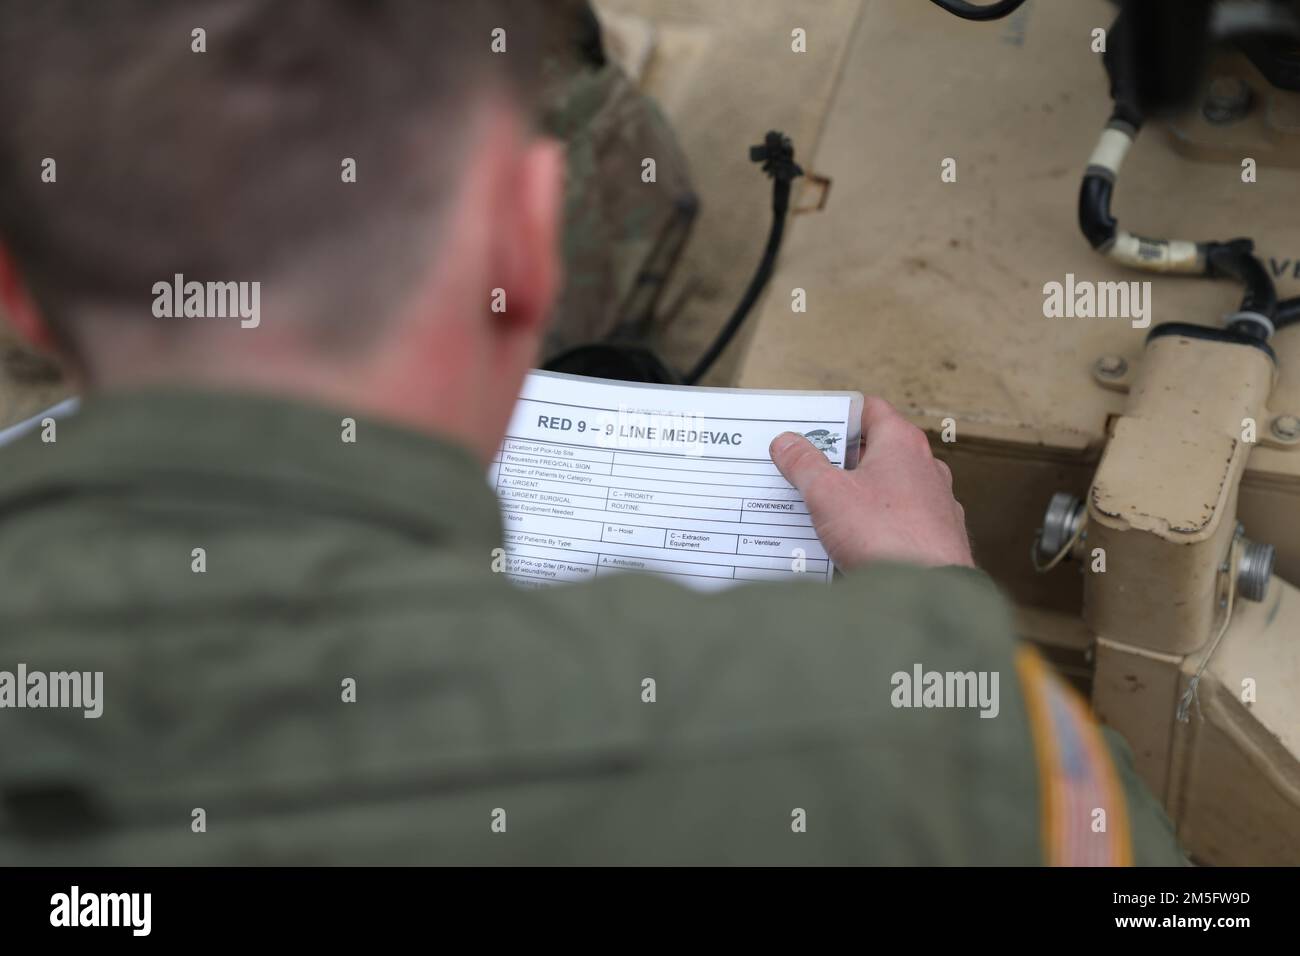 Spc. Austin Zink assigned to 2nd Battalion, 34th Armored Regiment, 1st Armored Brigade Combat Team, 1st Infantry Division, reviews the steps of a 9-line medical evacuation request as part of the land navigation training at Drawsko Pomorskie, Poland, March 15, 2022. Stock Photo